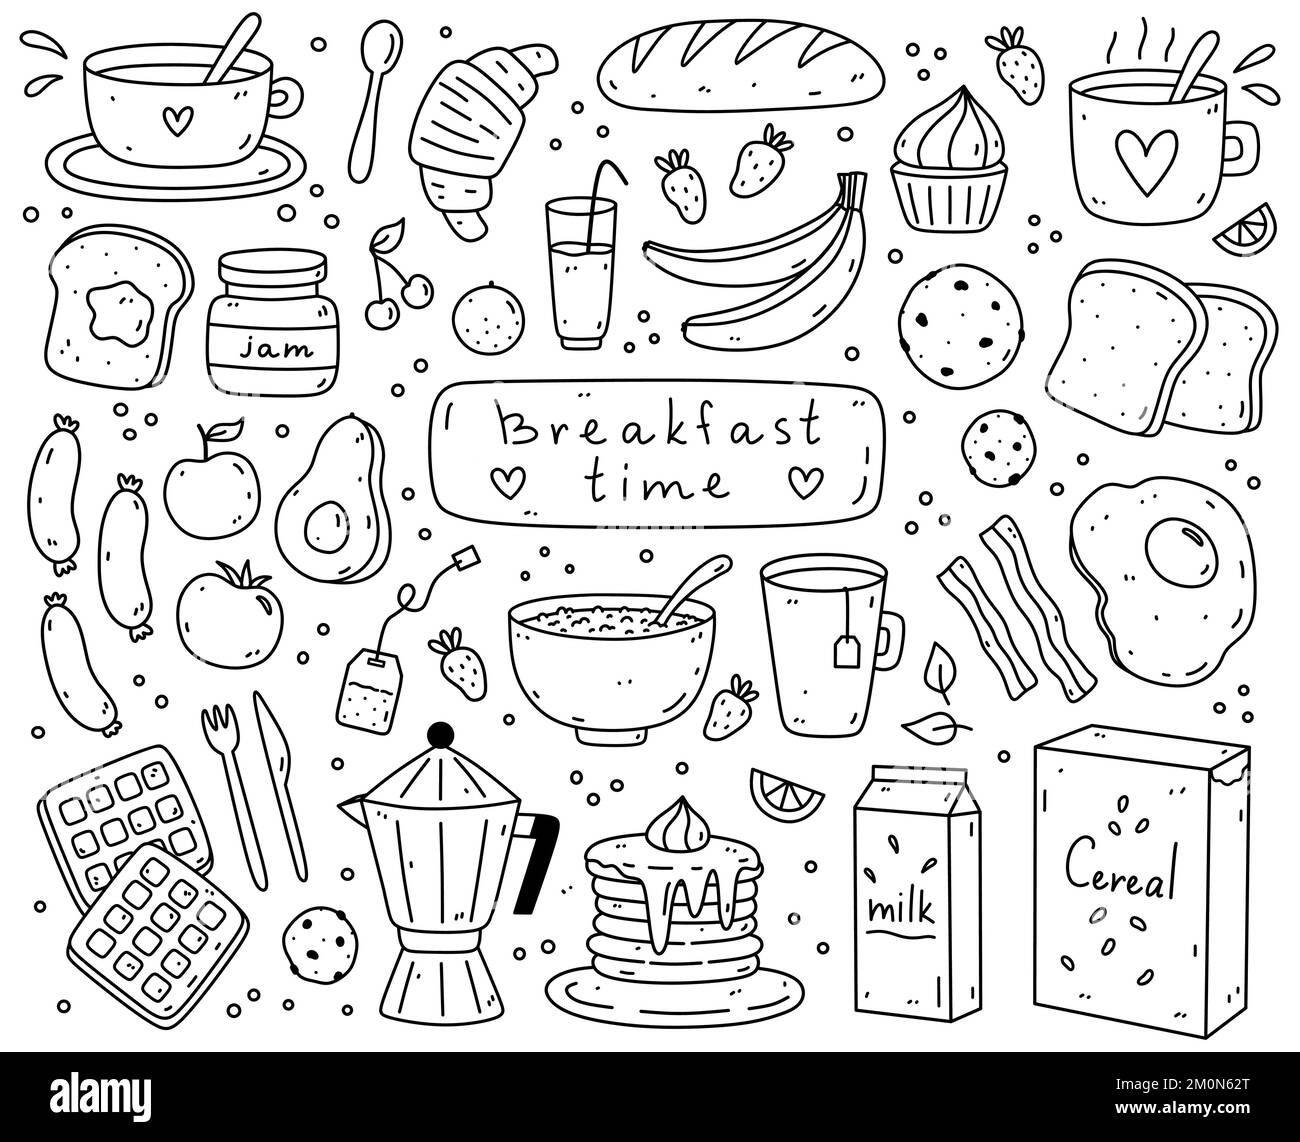 Cute set of breakfast food - fried eggs, bacon, toasts, sausages, coffee, tea, oatmeal, pancakes, cereal flakes and others. Vector hand-drawn doodle illustration. Perfect for cards, decorations, logo. Stock Vector